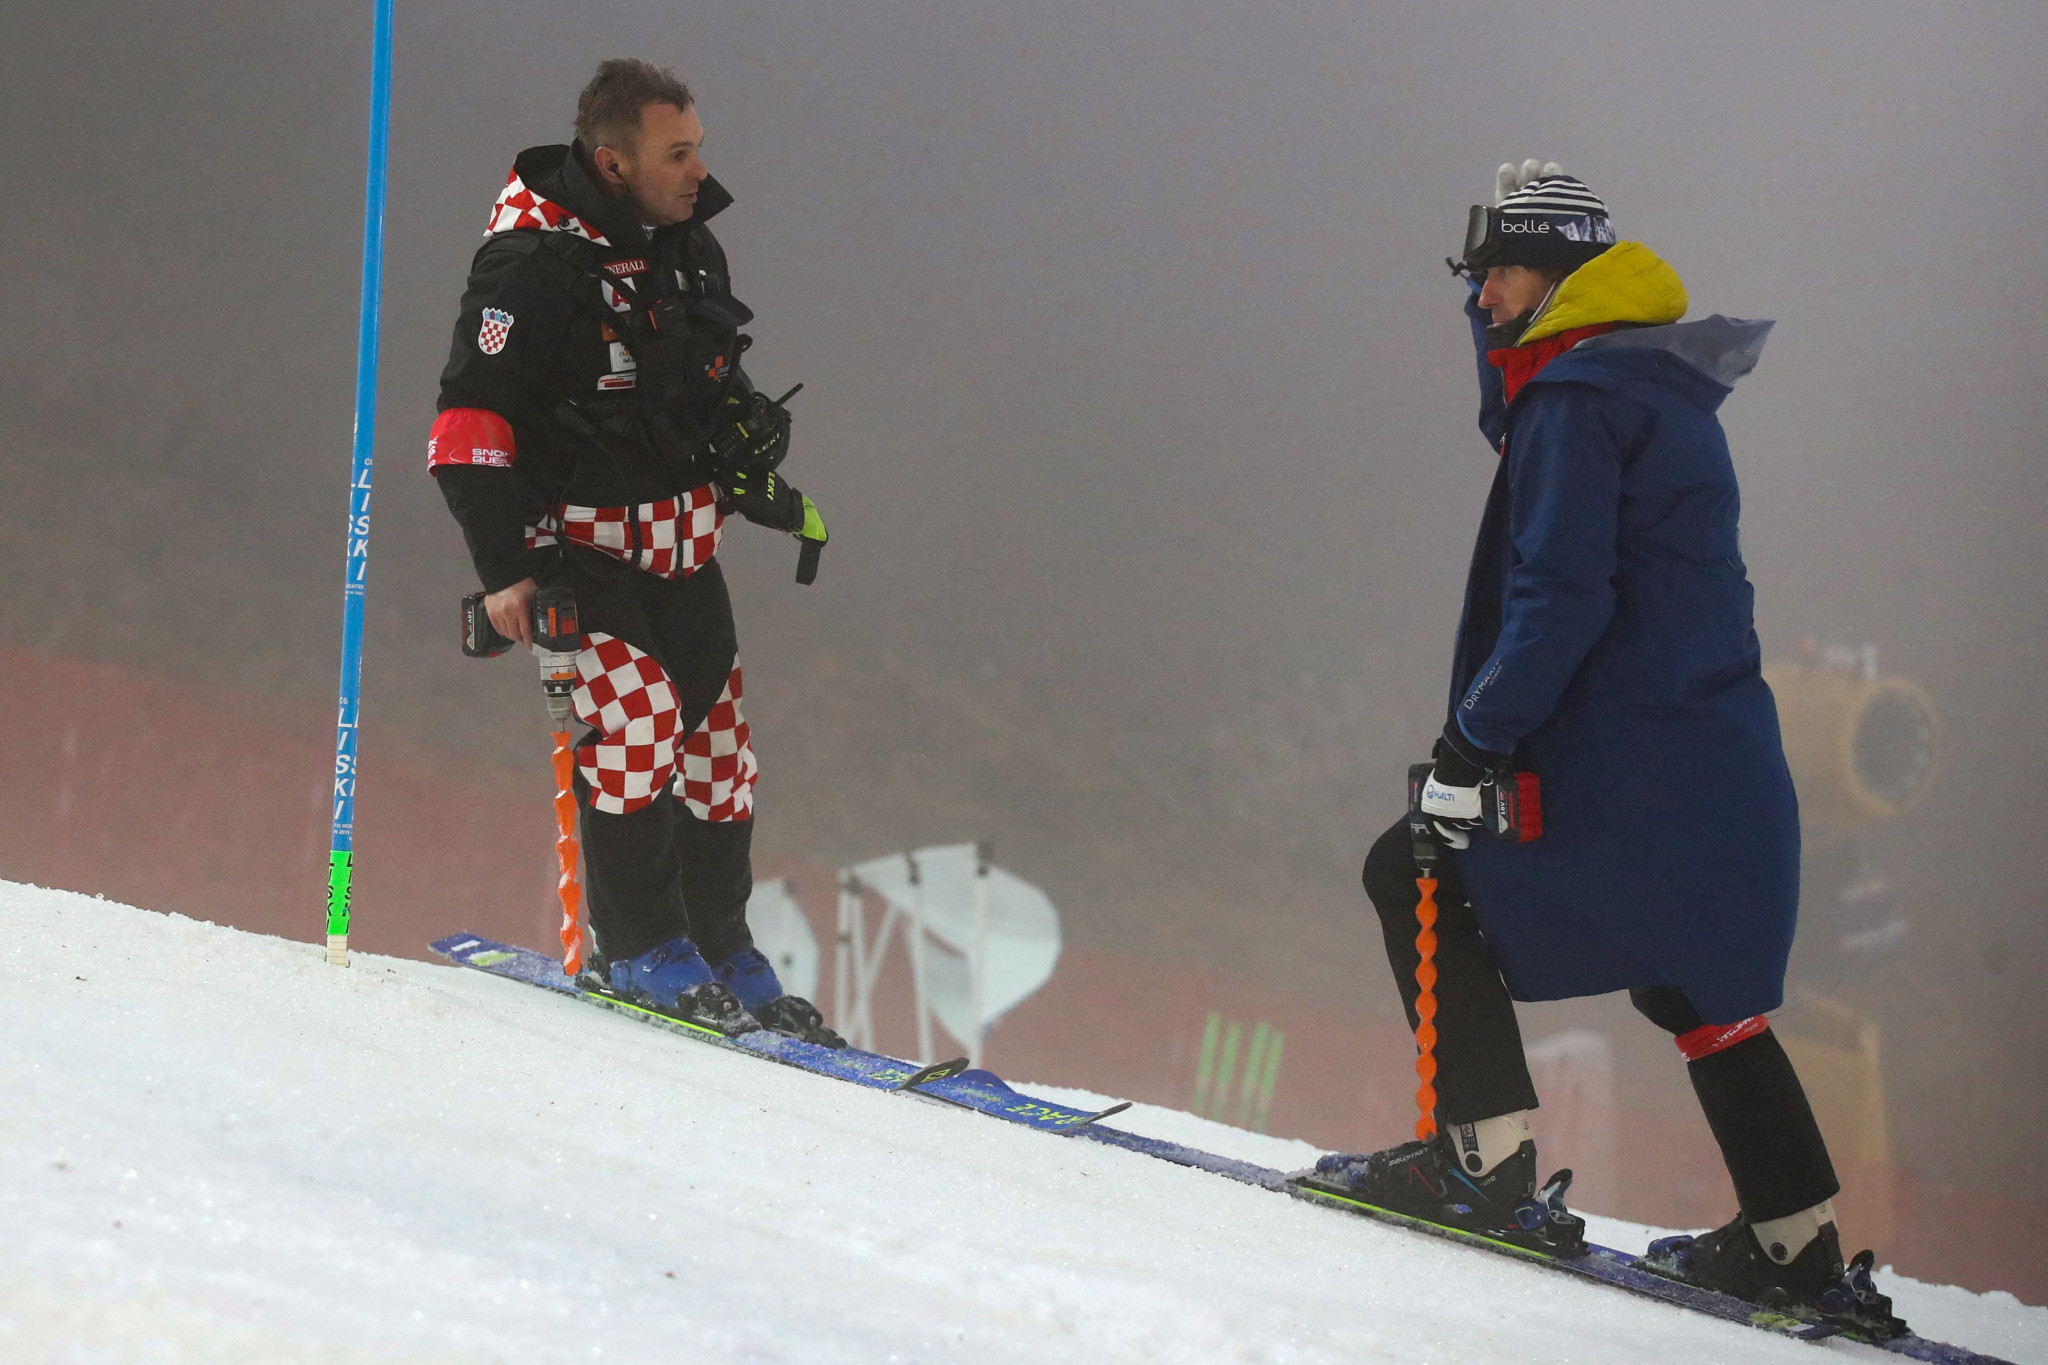 Men's slalom event at Zagreb Alpine Ski World Cup cancelled due to extreme weather